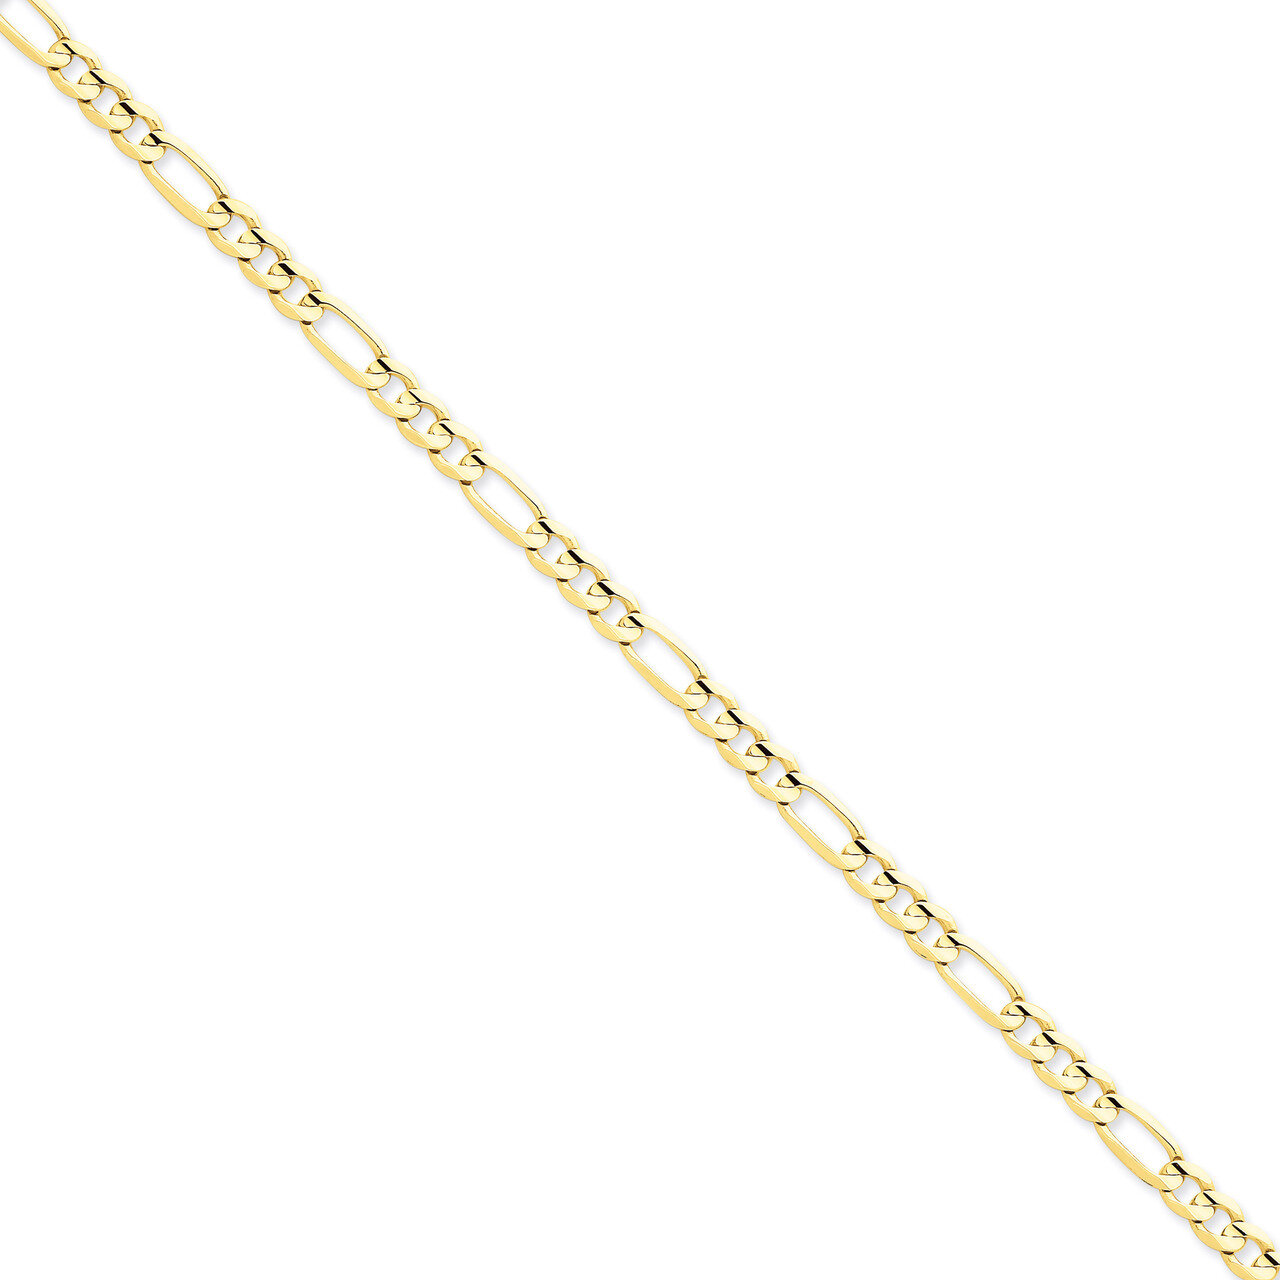 5.25mm Concave Open Figaro Chain 20 Inch 14k Gold LFG140-20